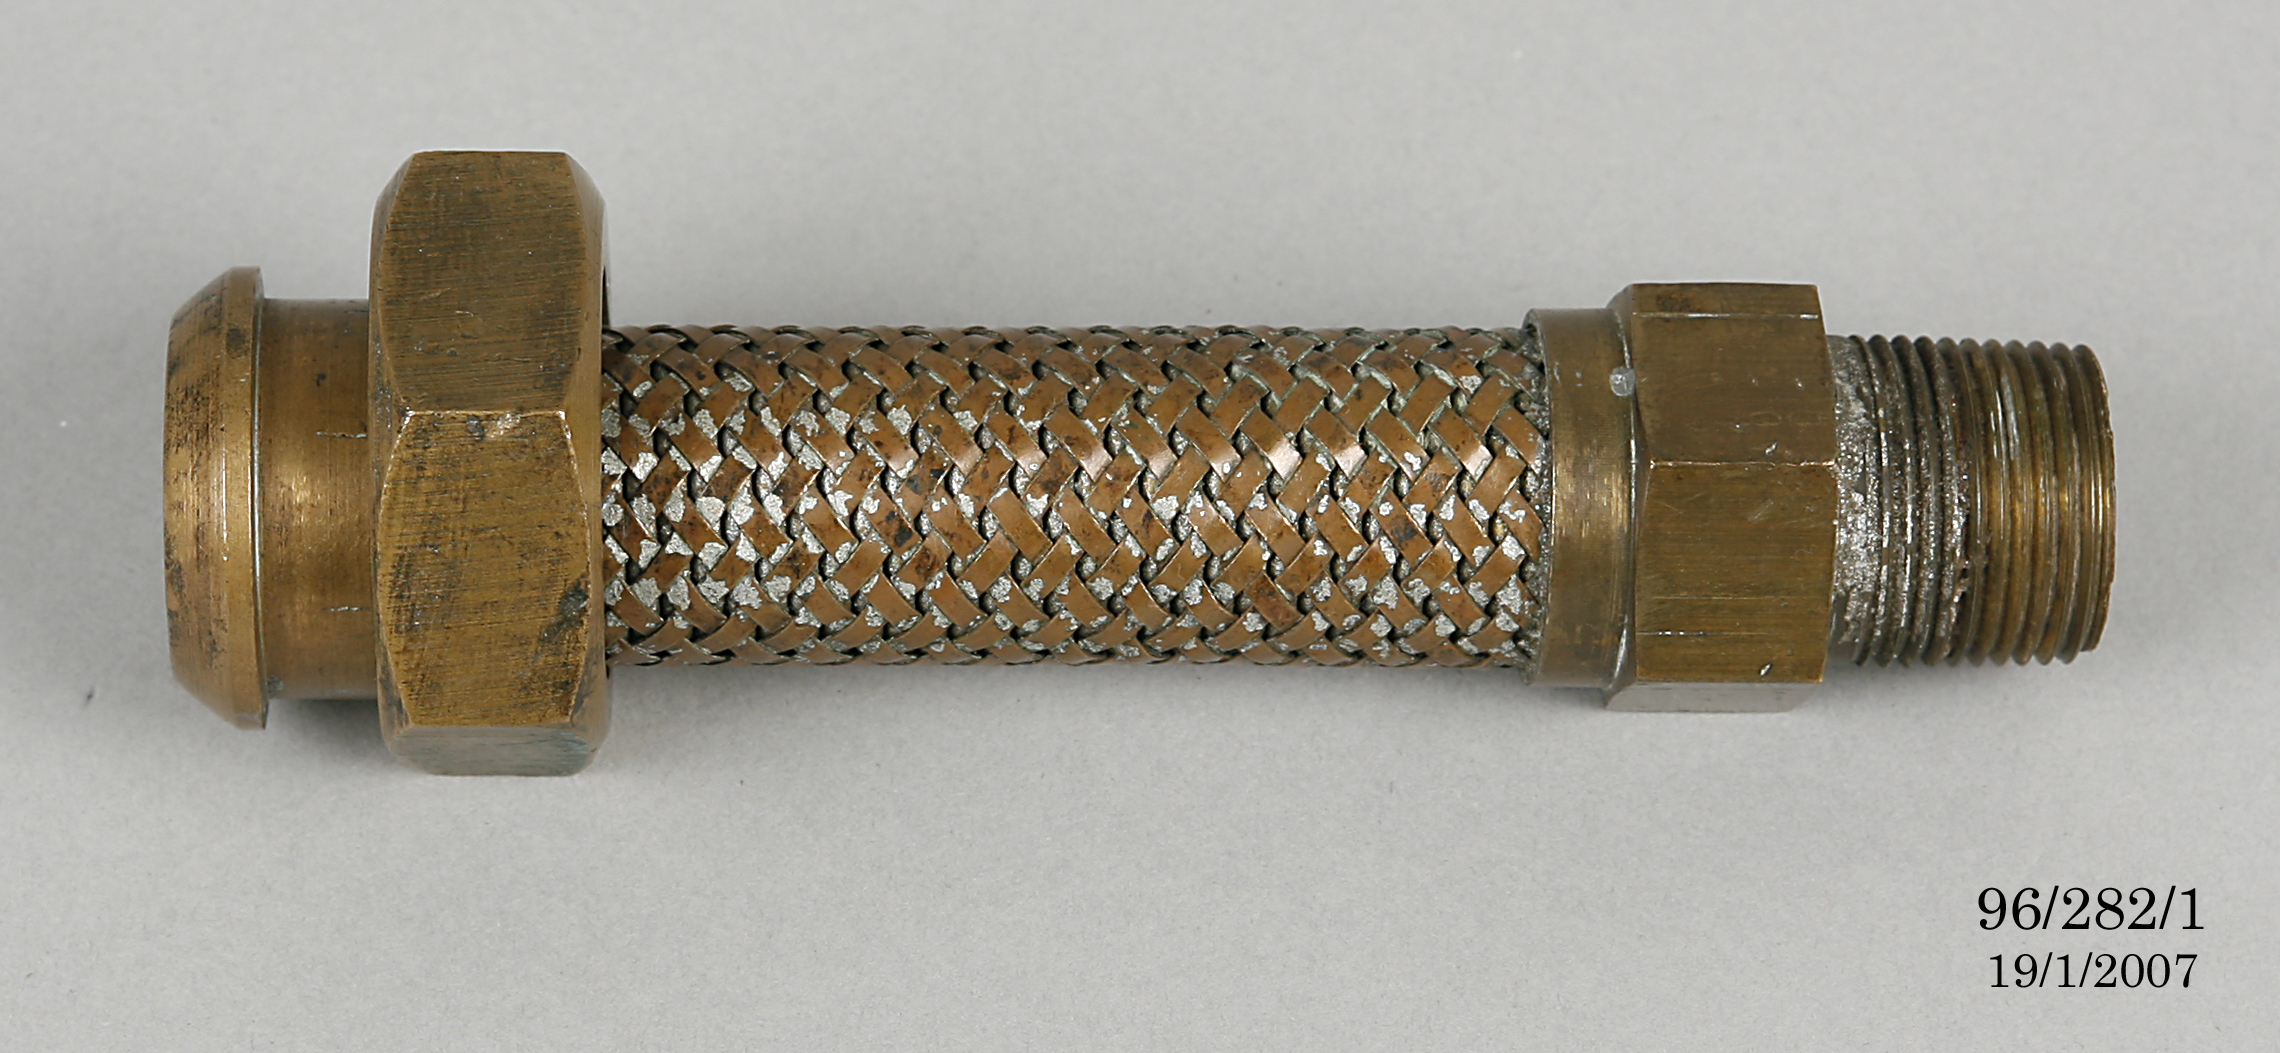 Part of aircraft hose from the 'Southern Cross'